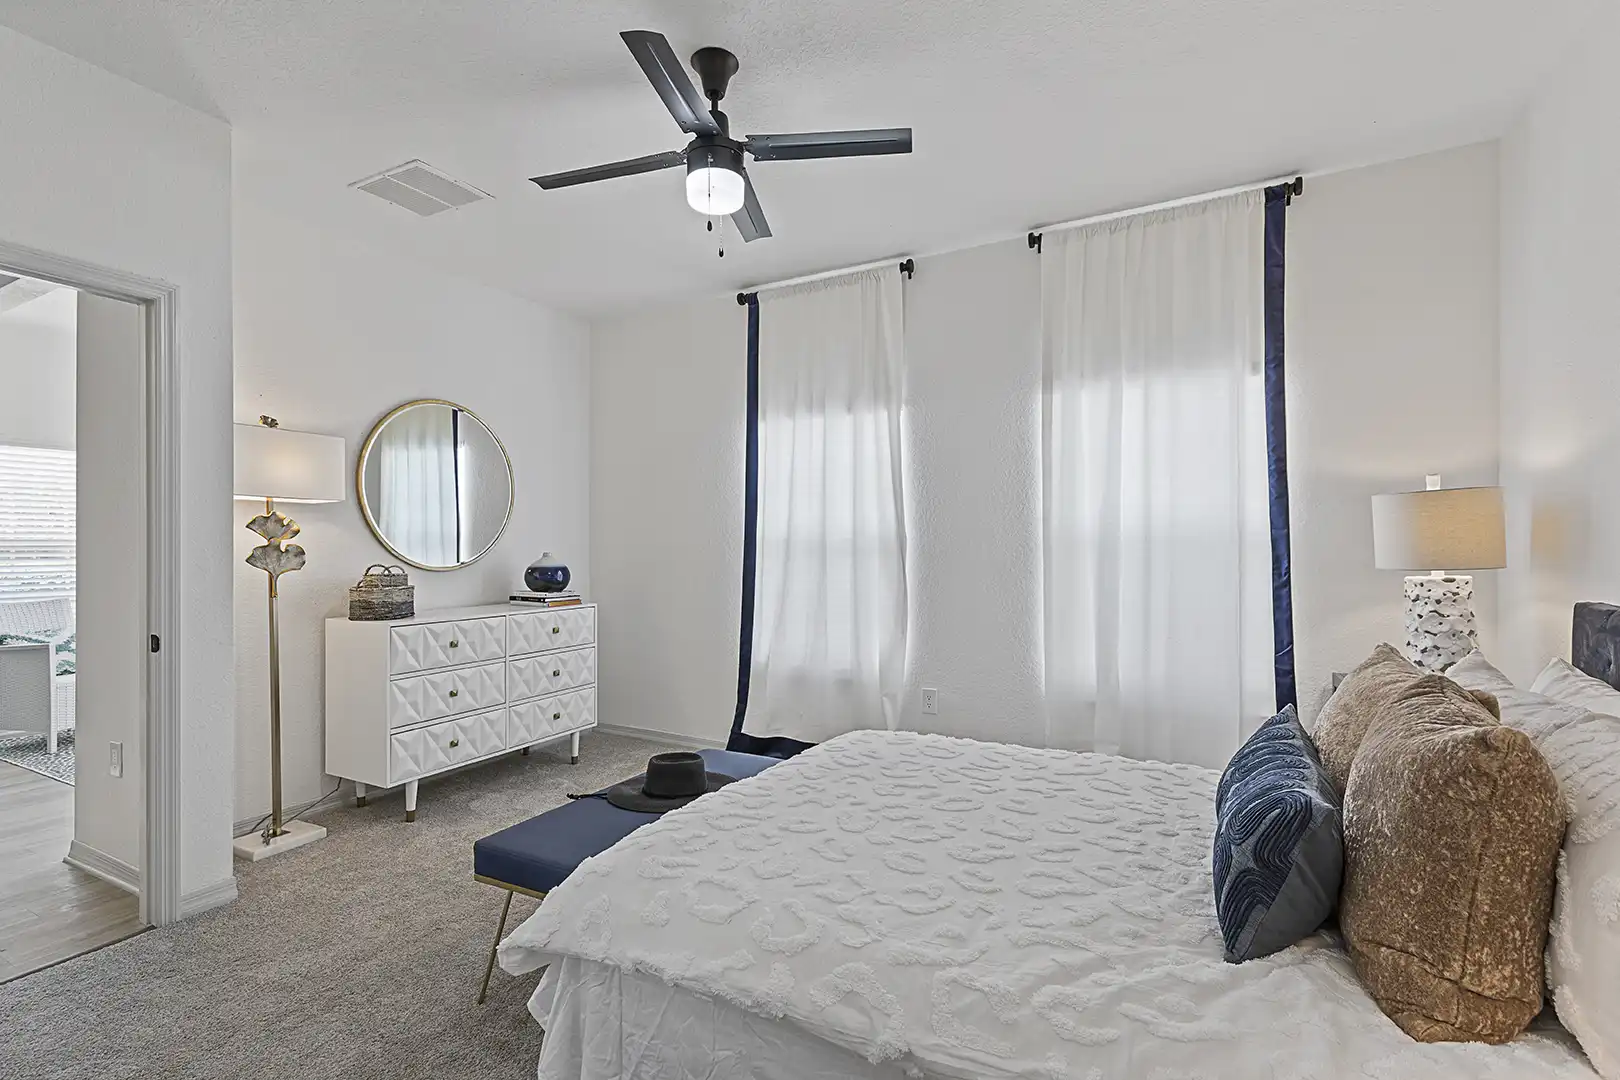 model bedroom with modern furniture, ceiling fan and carpet